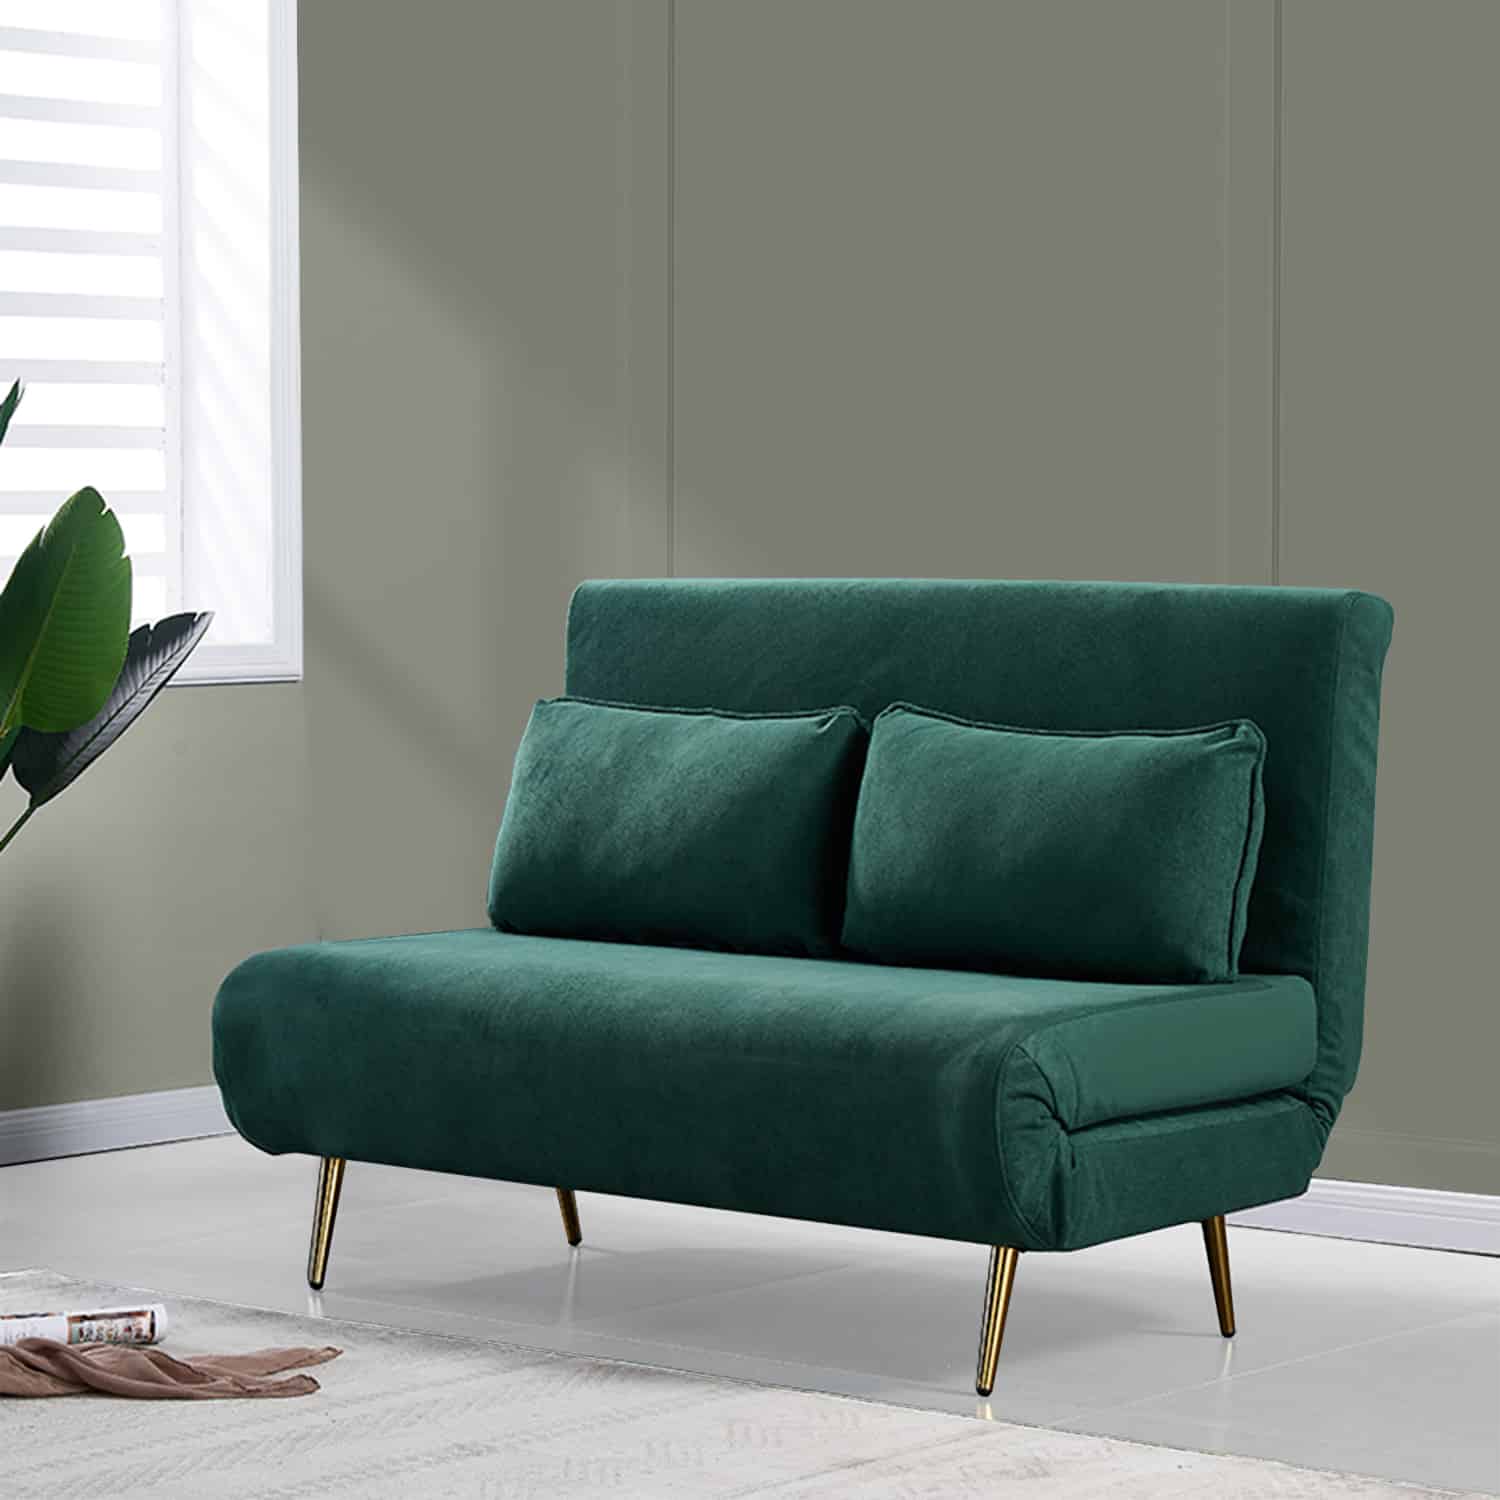 Millie Gold 3-Seater Sofabed (Green) - Furniture Source Philippines